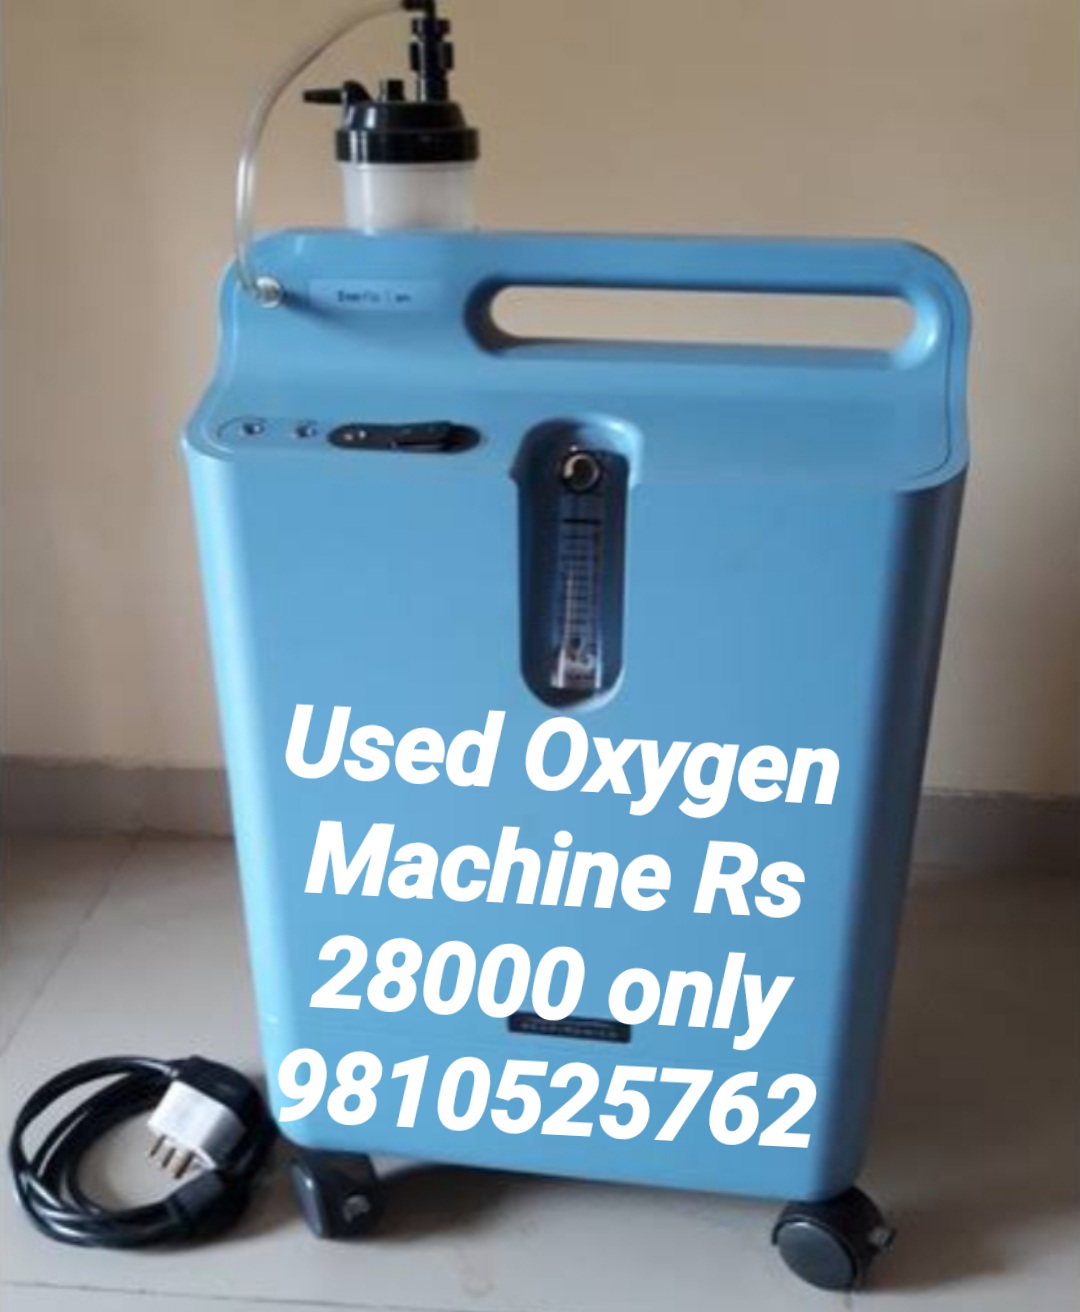 Used Philips Oxygen Concentrator In New Delhi Greater Noida 9810525762